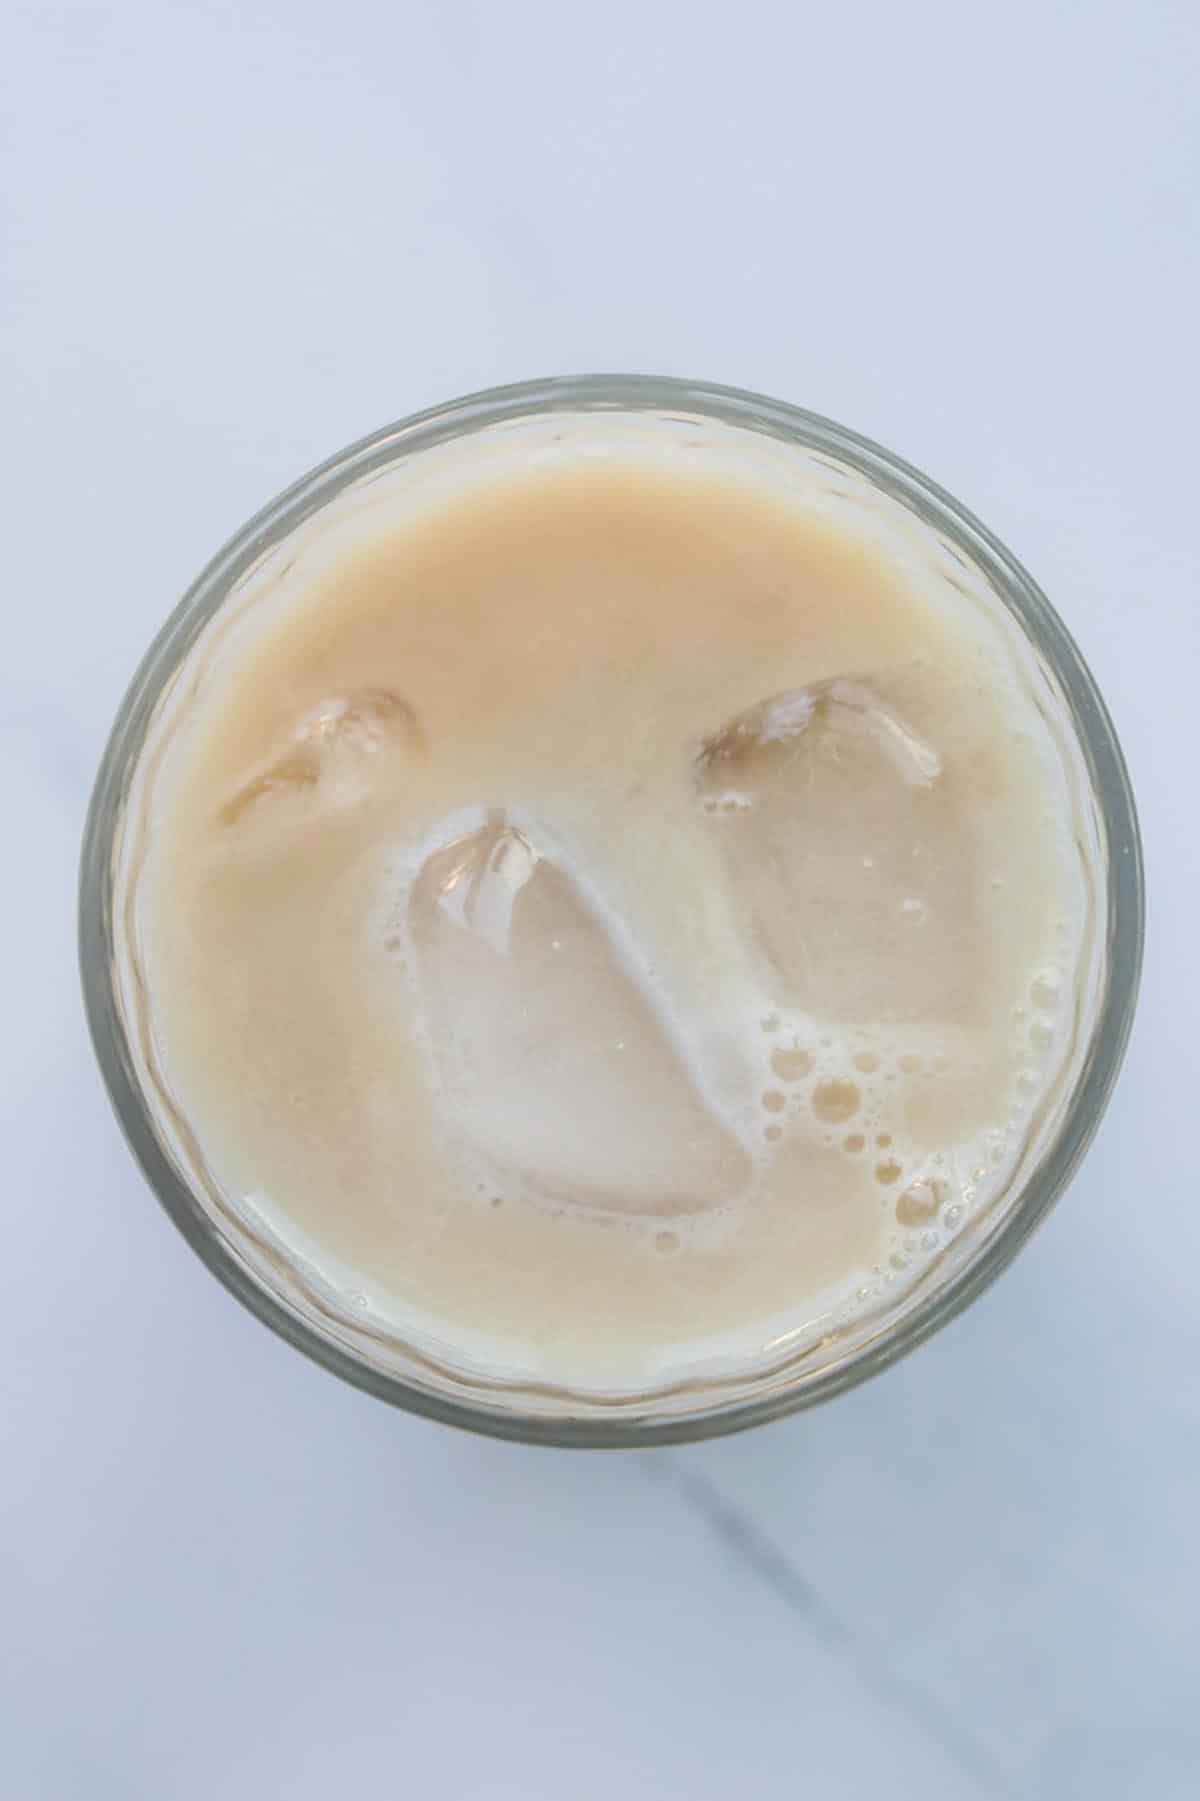 Milk tea in a glass with ice.